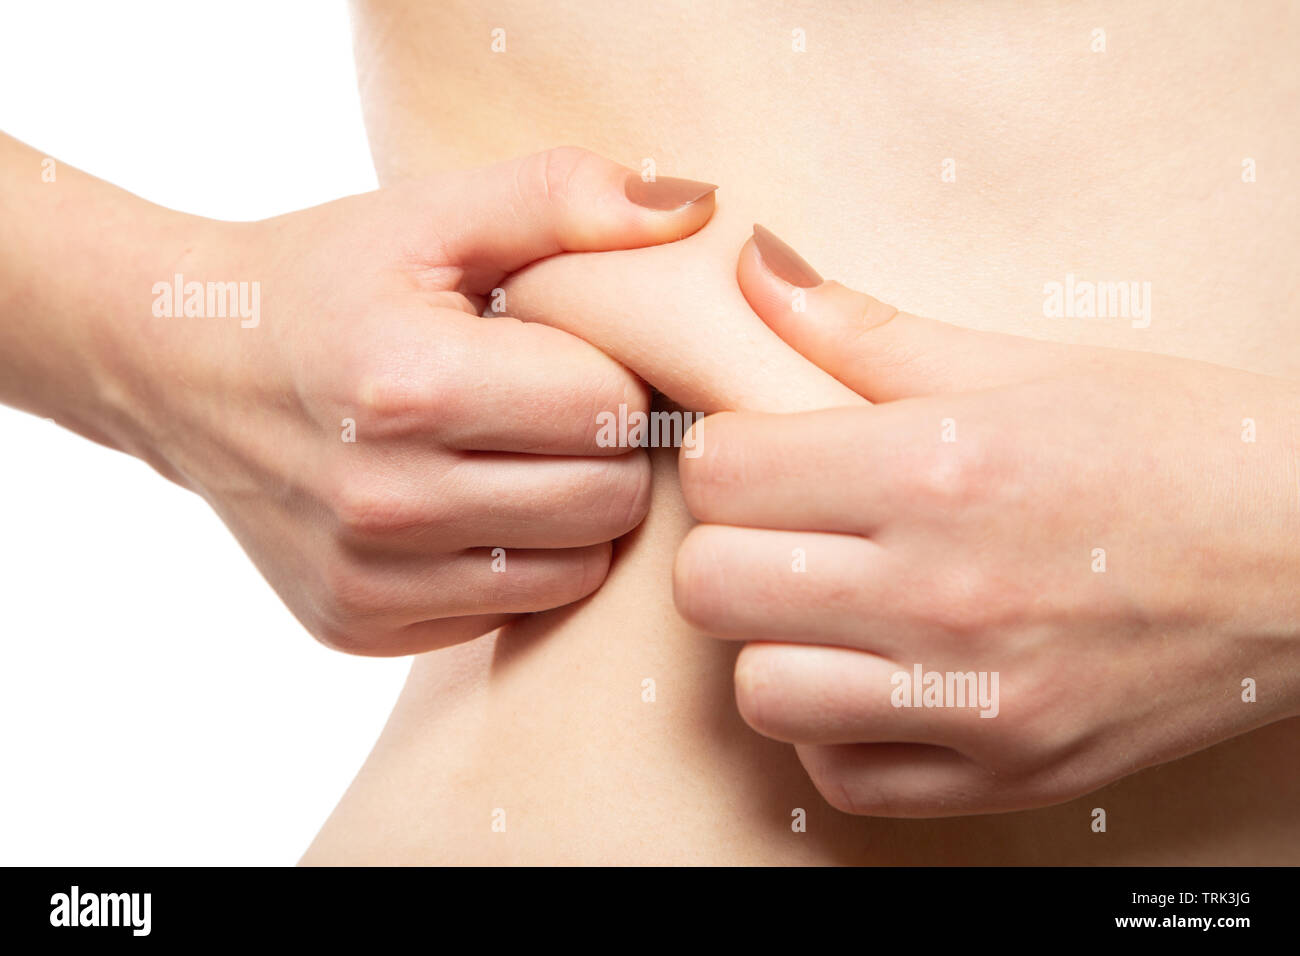 punch oversized female buttocks with cellulite on white background Stock Photo